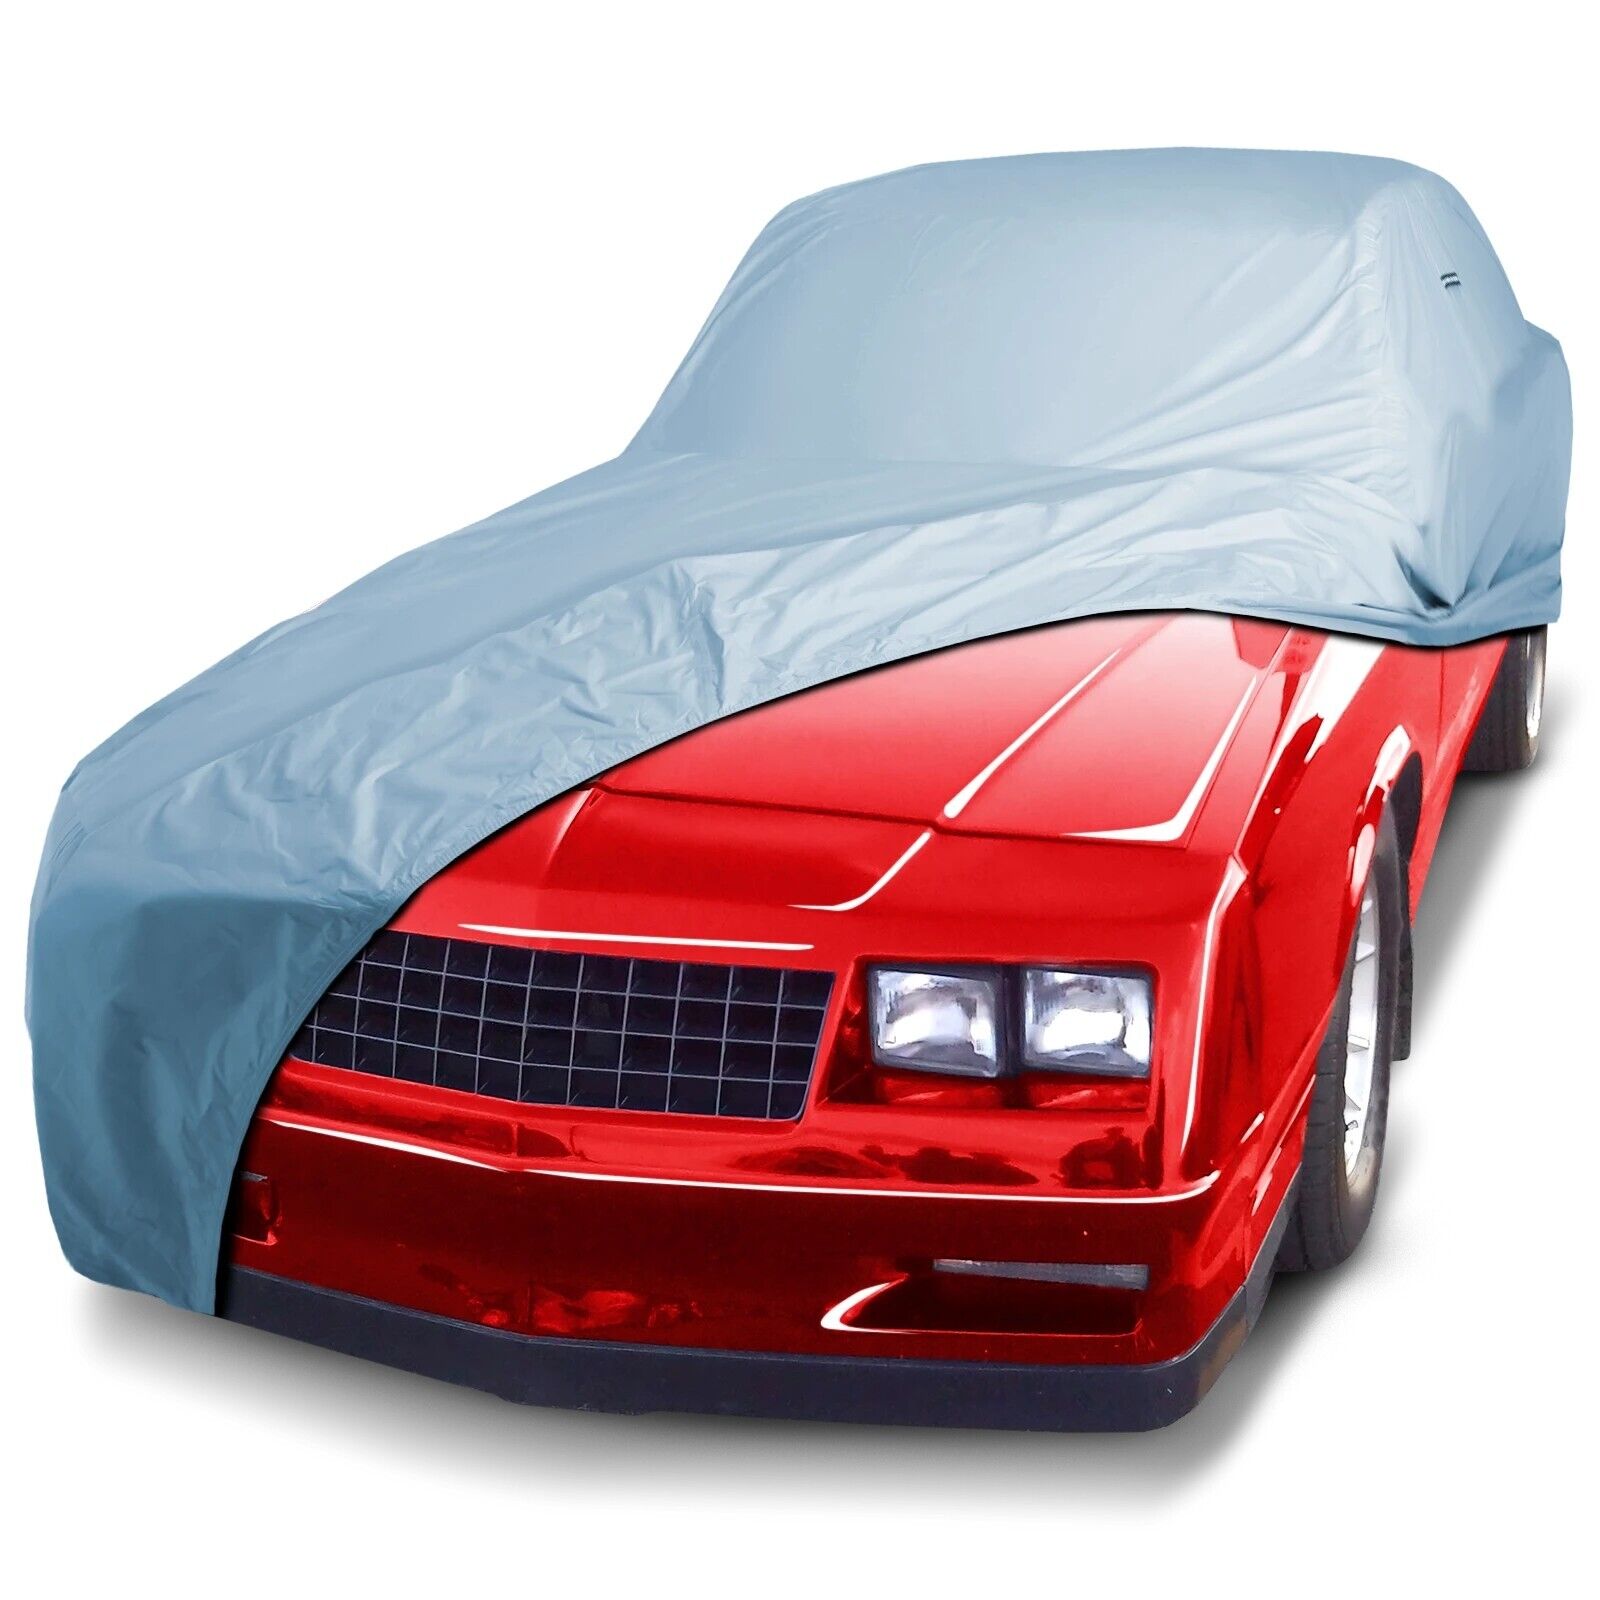 [CHEVY MONTE CARLO] 1981 1982 1983 1984 1985 1986 1987 1988 Waterproof Car Cover